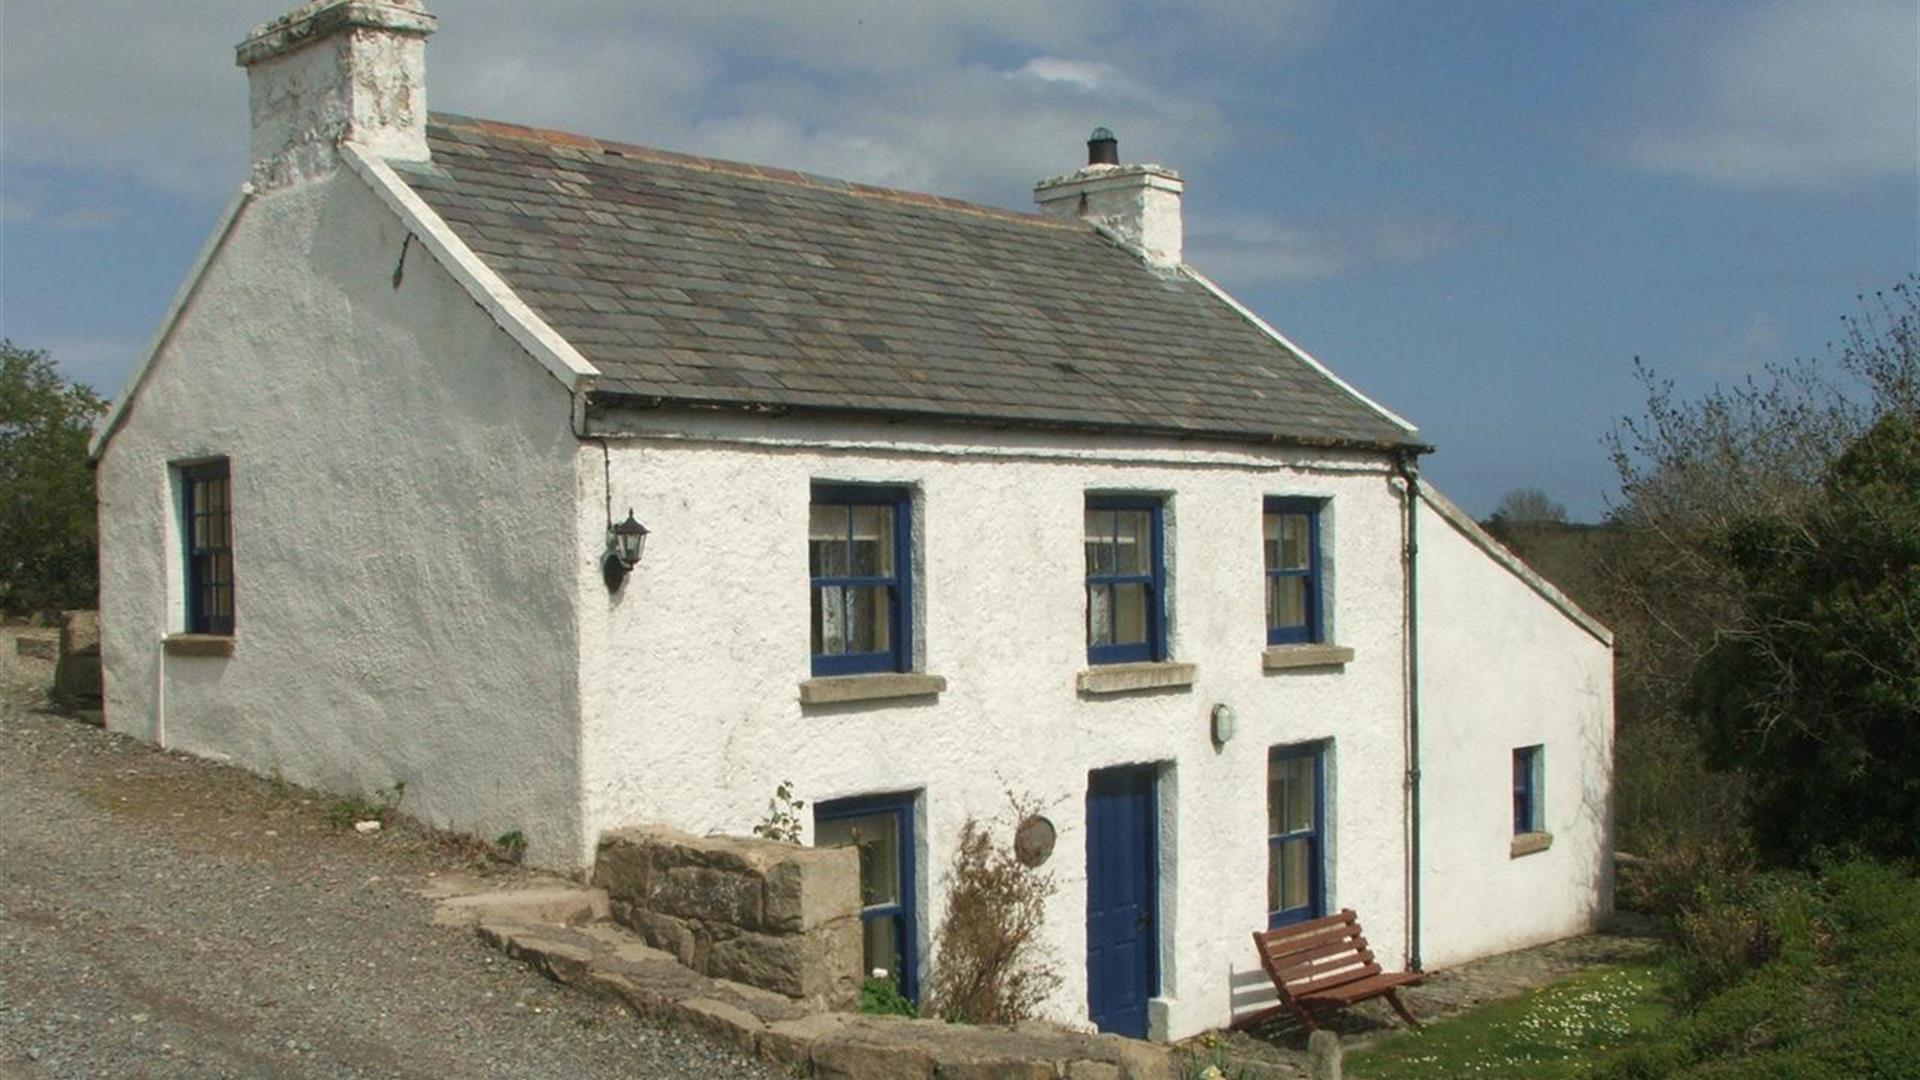 Hanna's Close Holiday Cottages - Johnny's Cottage